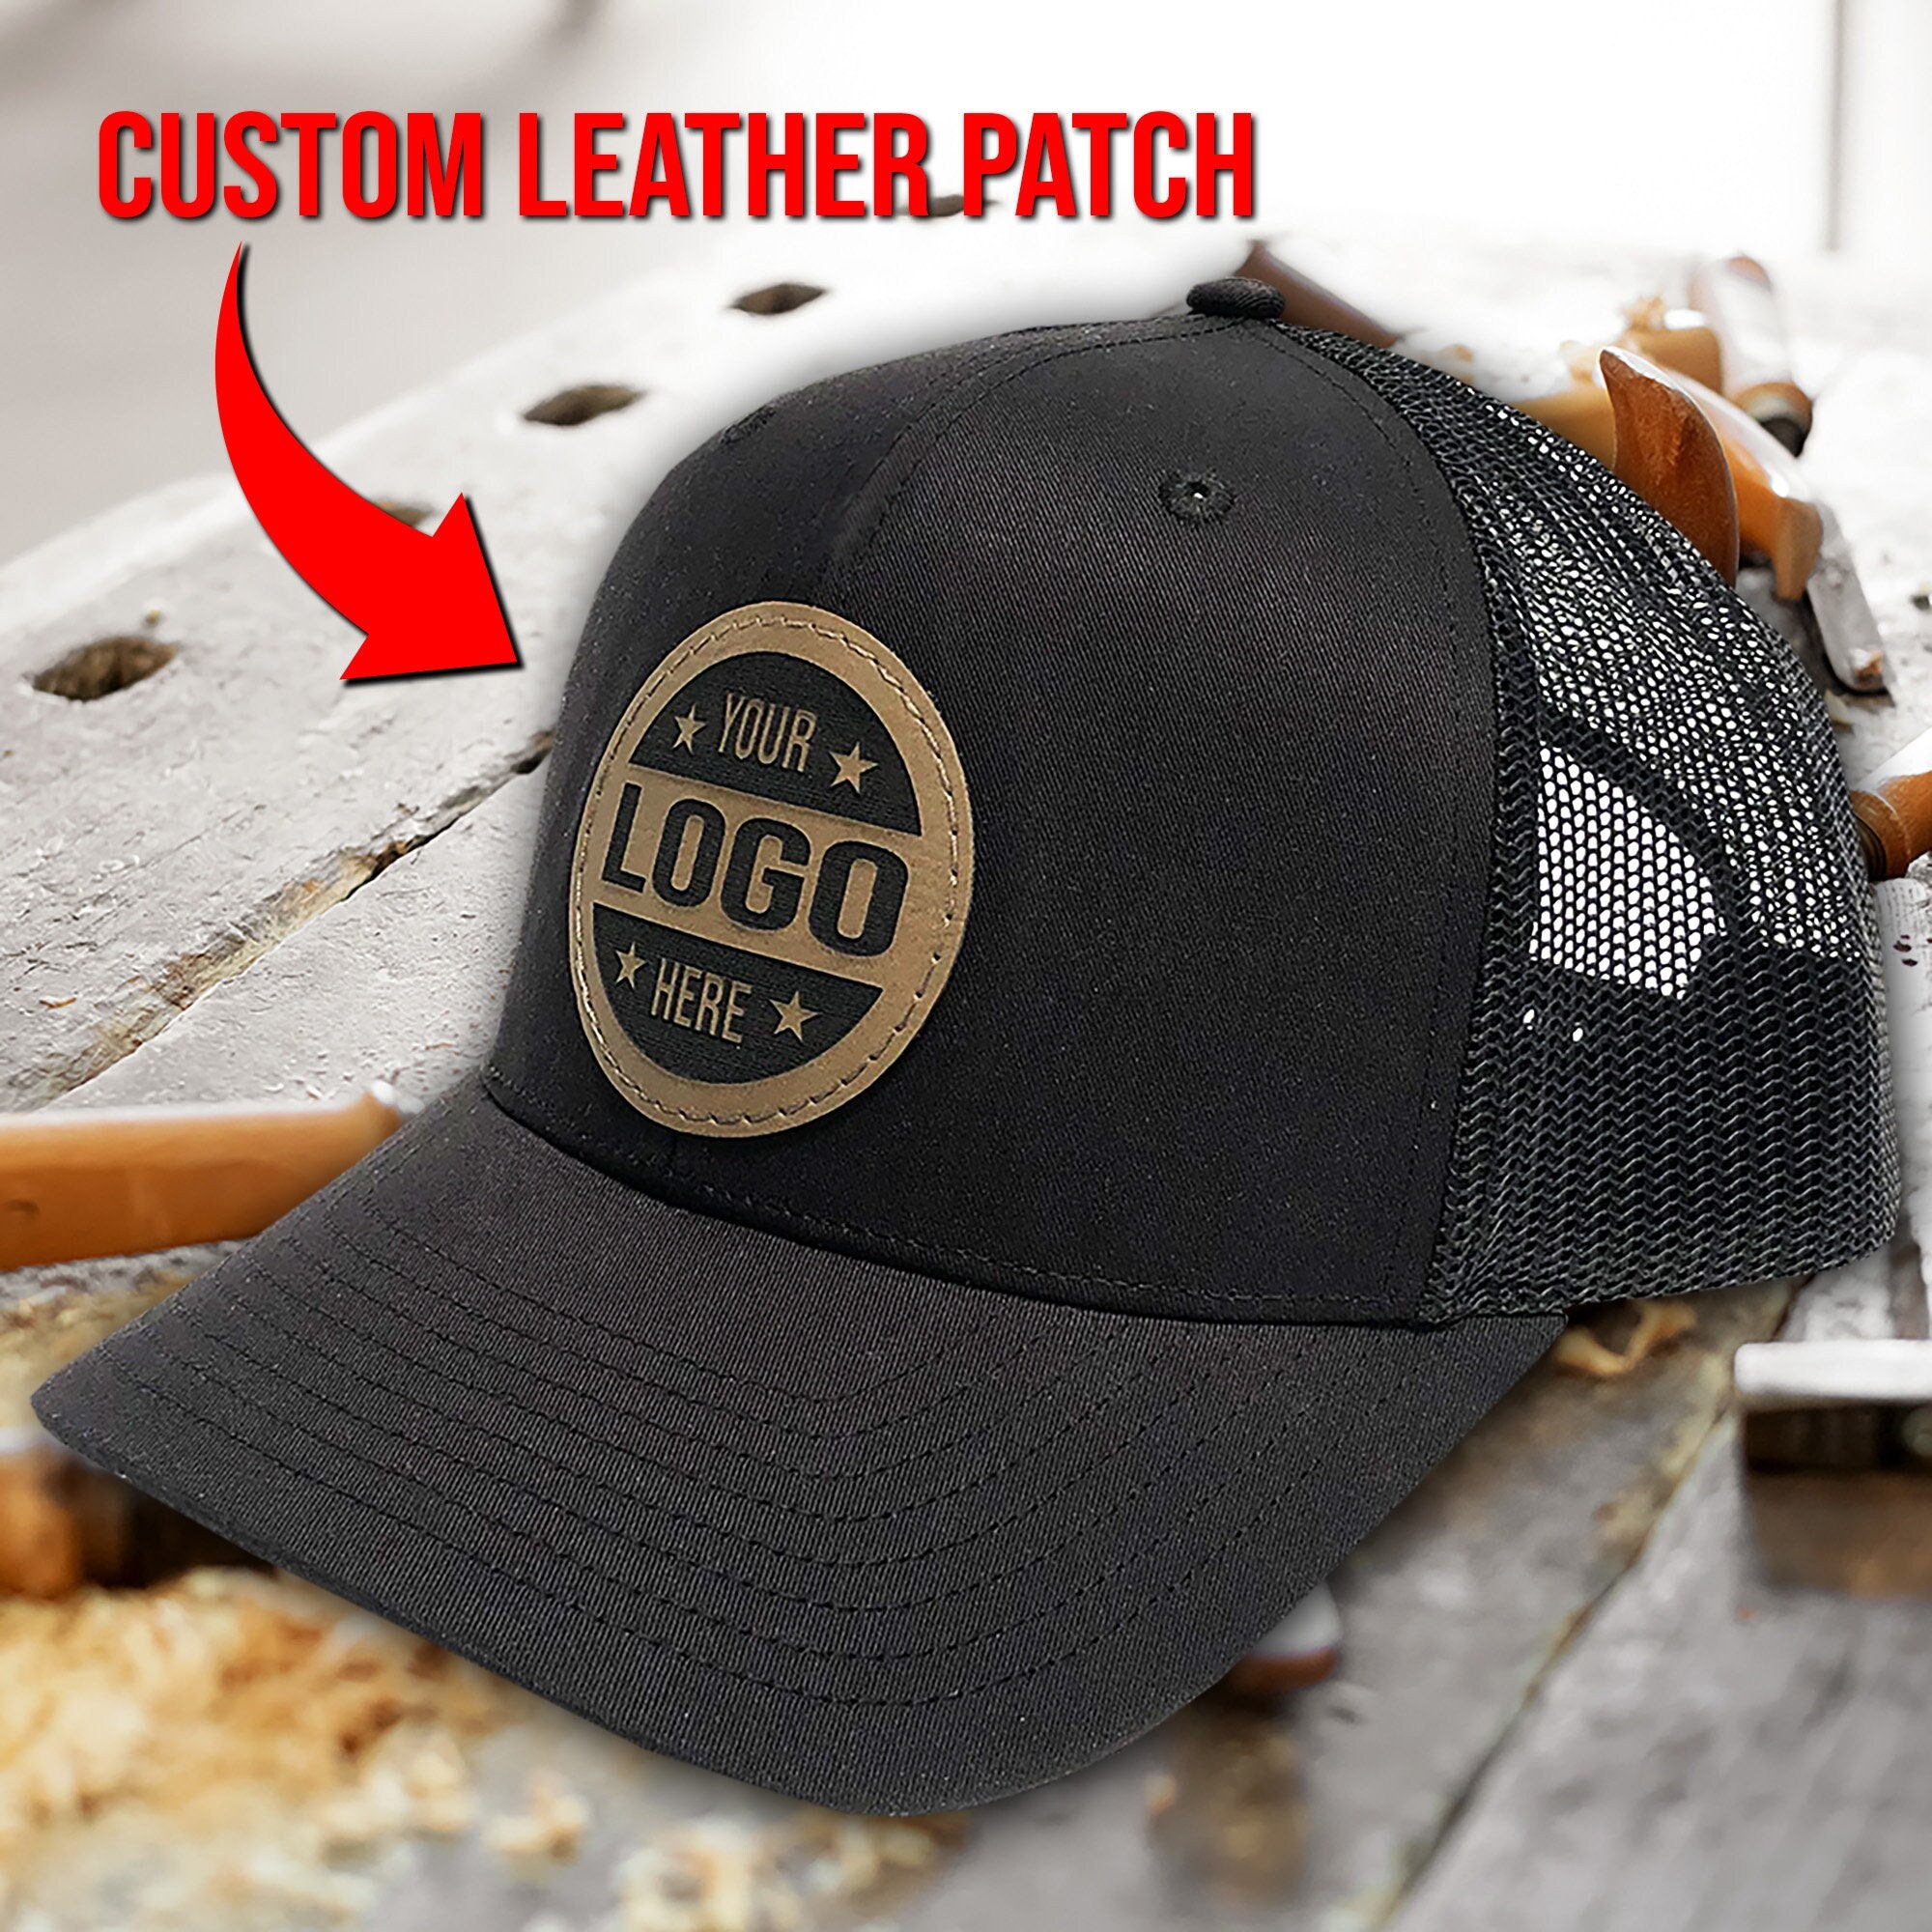 10 Leather Hat Patches Custom made from Genuine Leather with Your Logo,  Text, or Design in Any Shape - 10 Count - Ships VERY FAST!